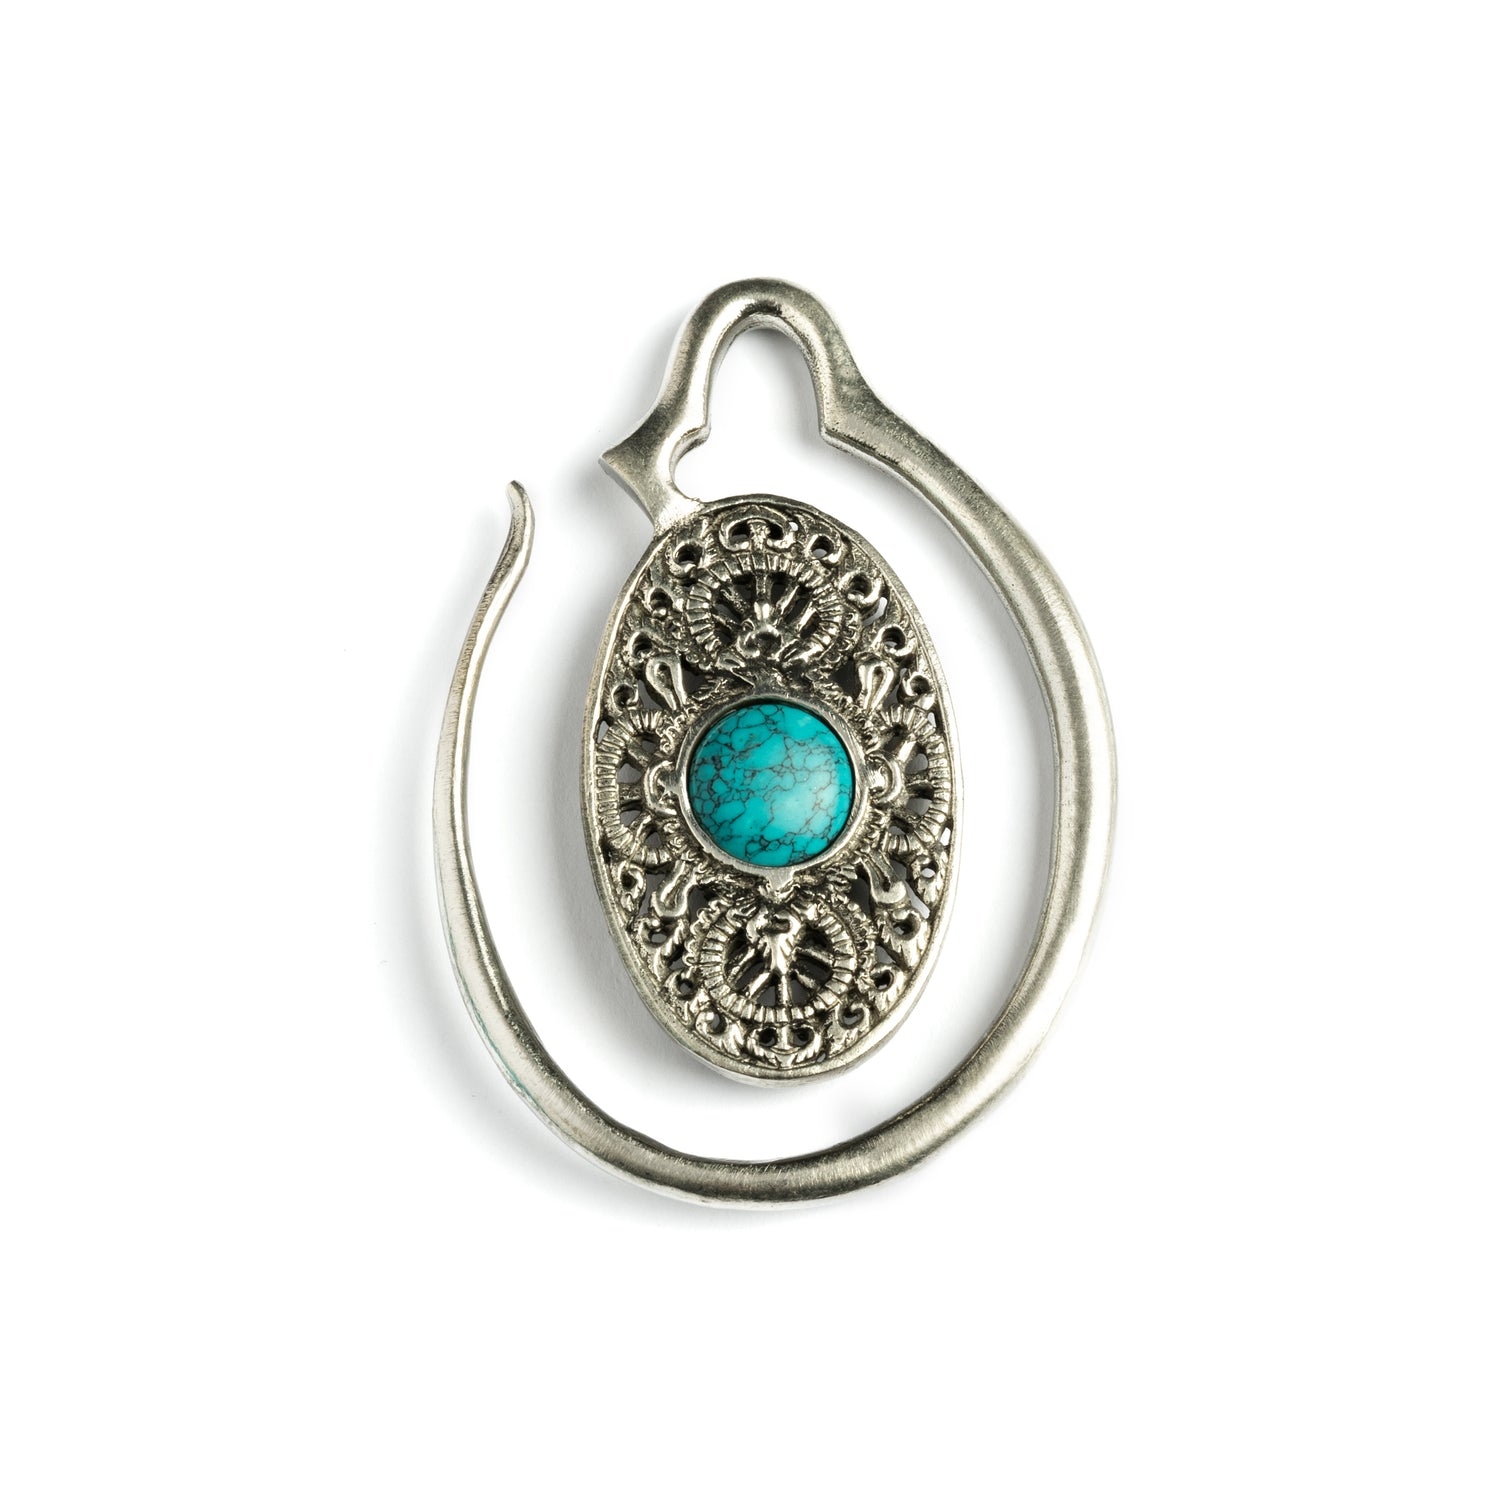 single large ear weights hangers, silver colour oval shaped with intricate filigree pattern and turquoise